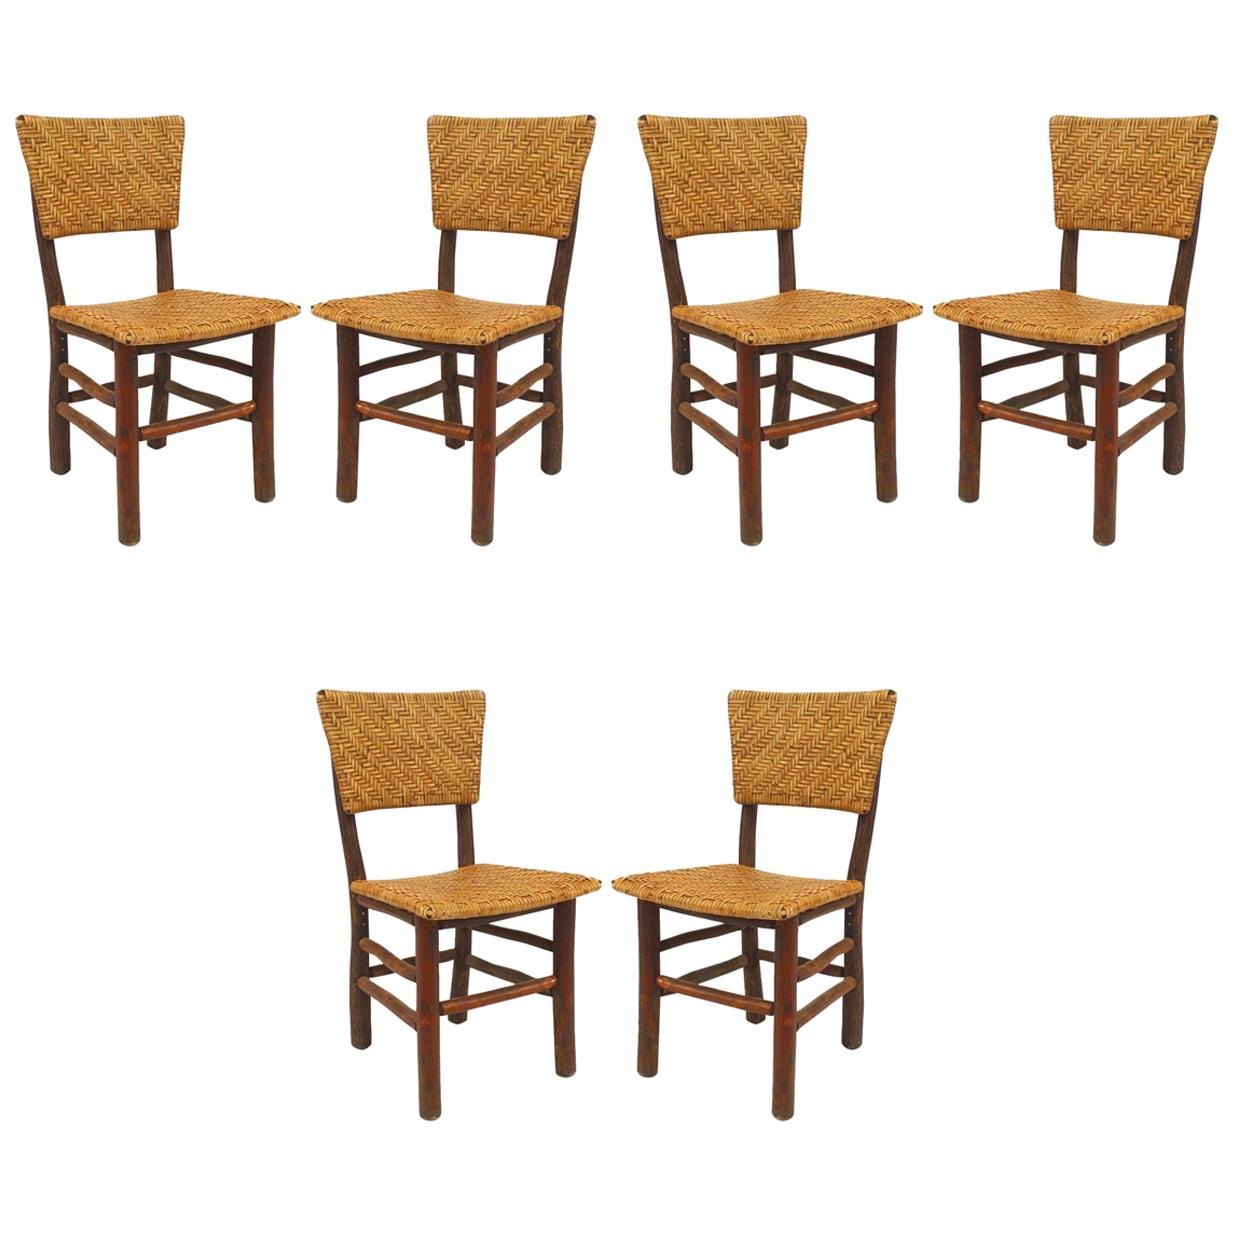 Set of 6 Rustic Old Hickory Rattan Side Chairs